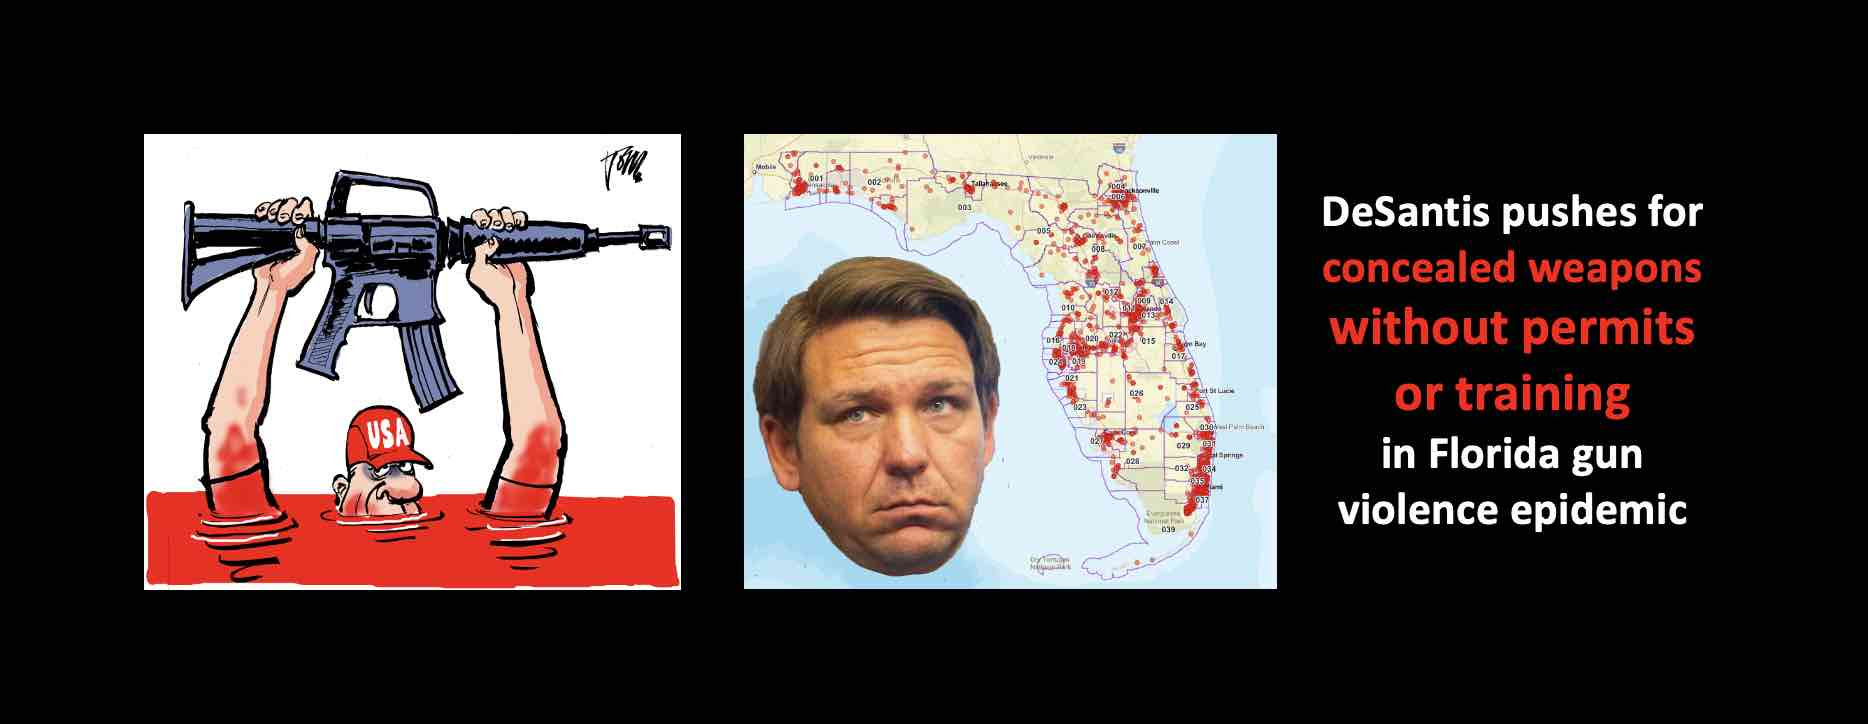 Florida GUN VIOLENCE MAP as DeSantis pushes for concealed firearms WITHOUT PERMITS OR TRAINING